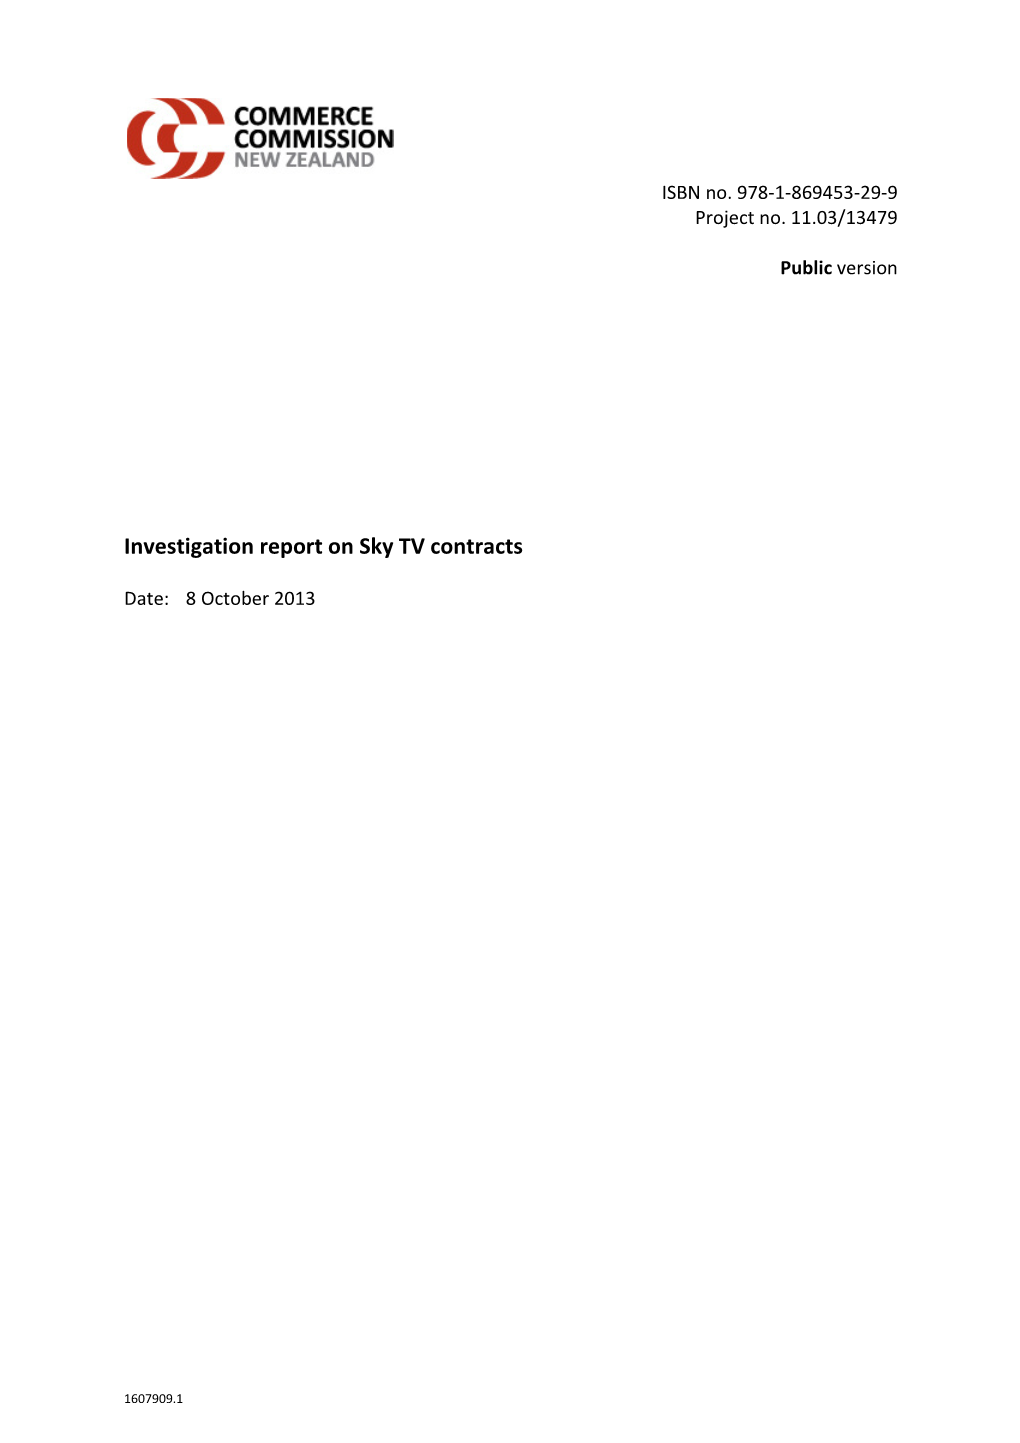 Investigation Report on Sky TV Contracts